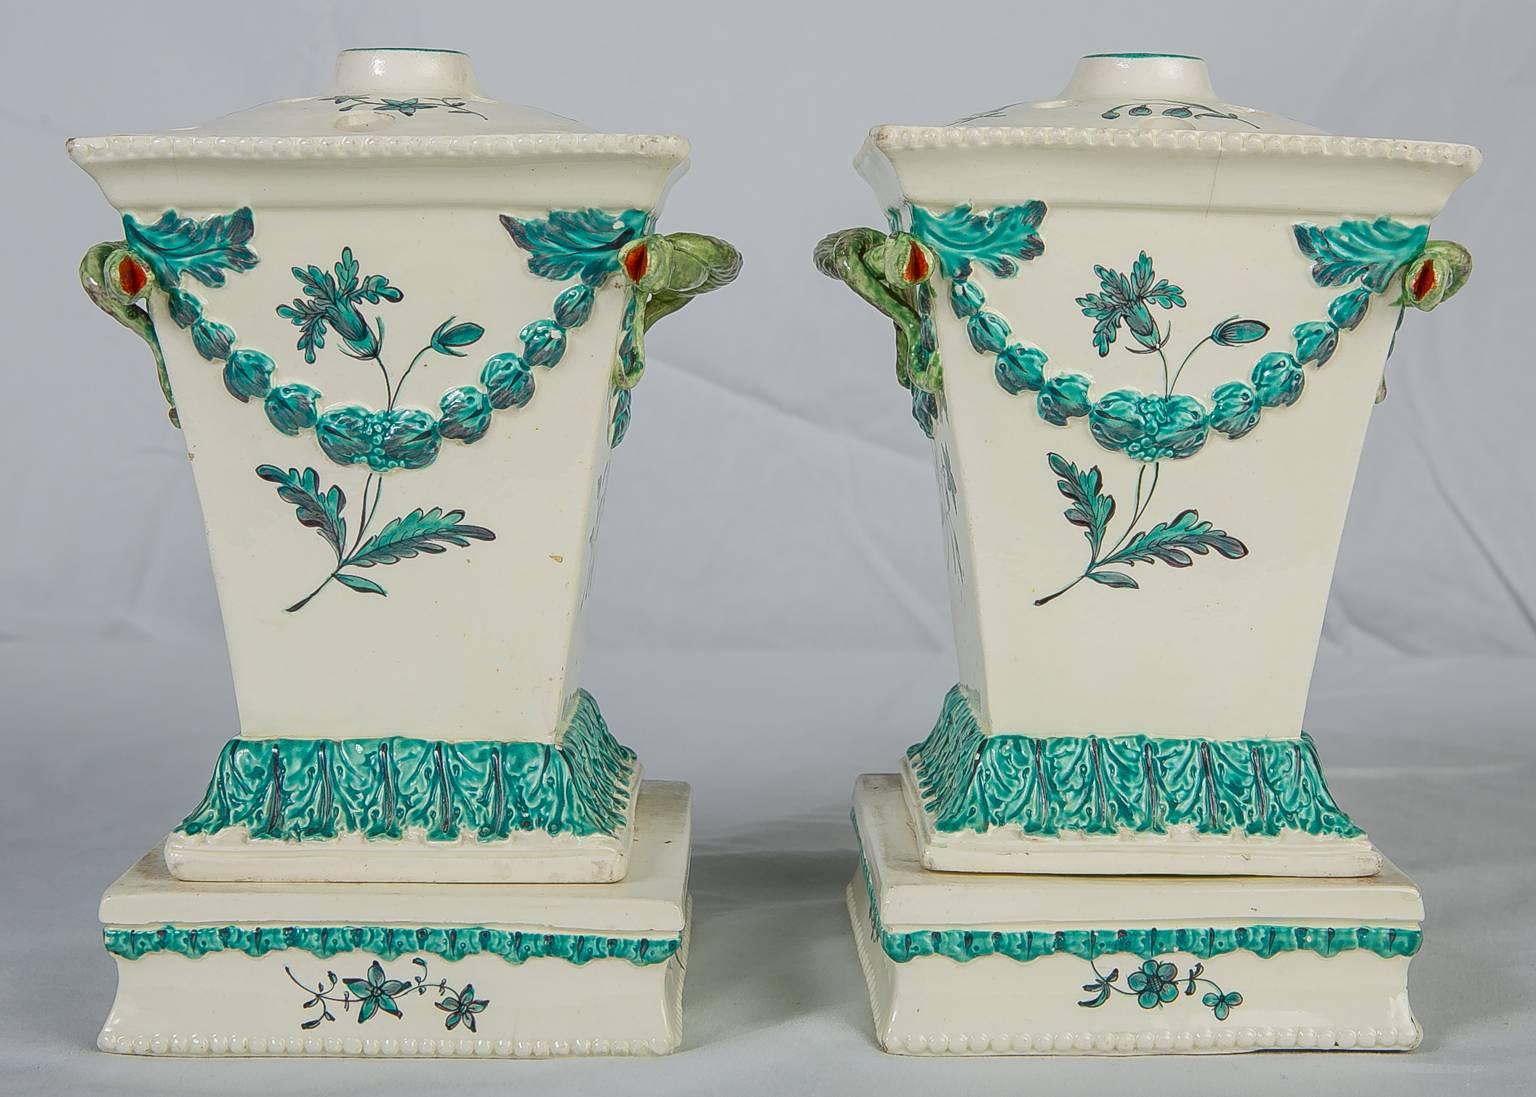 WHY WE LOVE IT: One of our absolute favorites!
A pair of 18th-century creamware flower holders complete with stands and covers made in England by Neale & Co. was one of the finest 18th century English potteries. The entire composition is classically